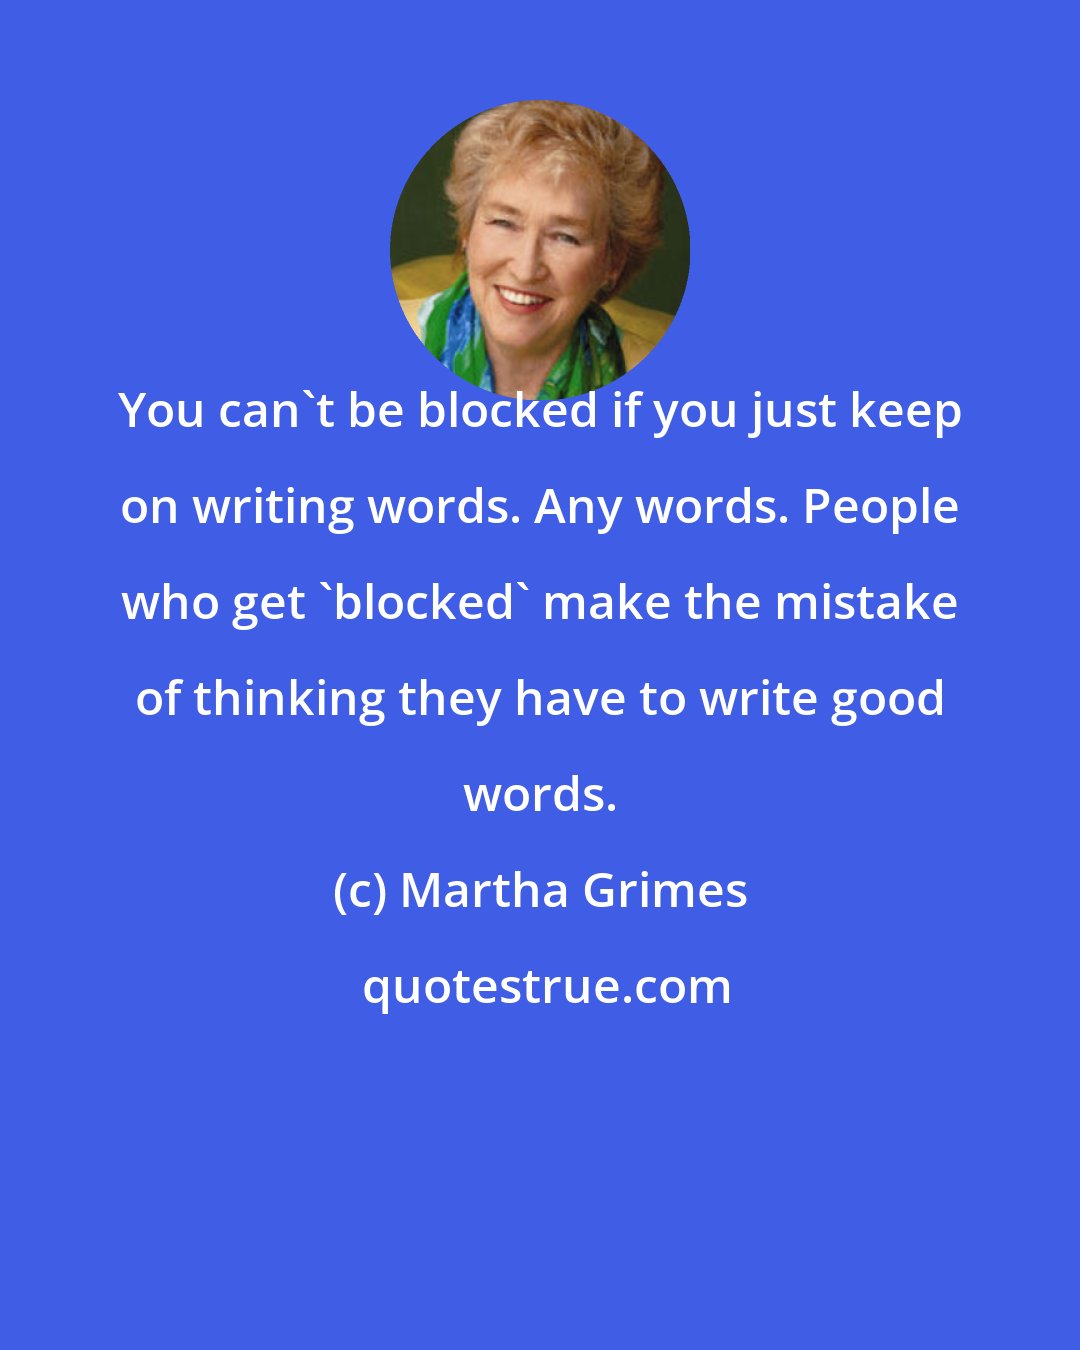 Martha Grimes: You can't be blocked if you just keep on writing words. Any words. People who get 'blocked' make the mistake of thinking they have to write good words.